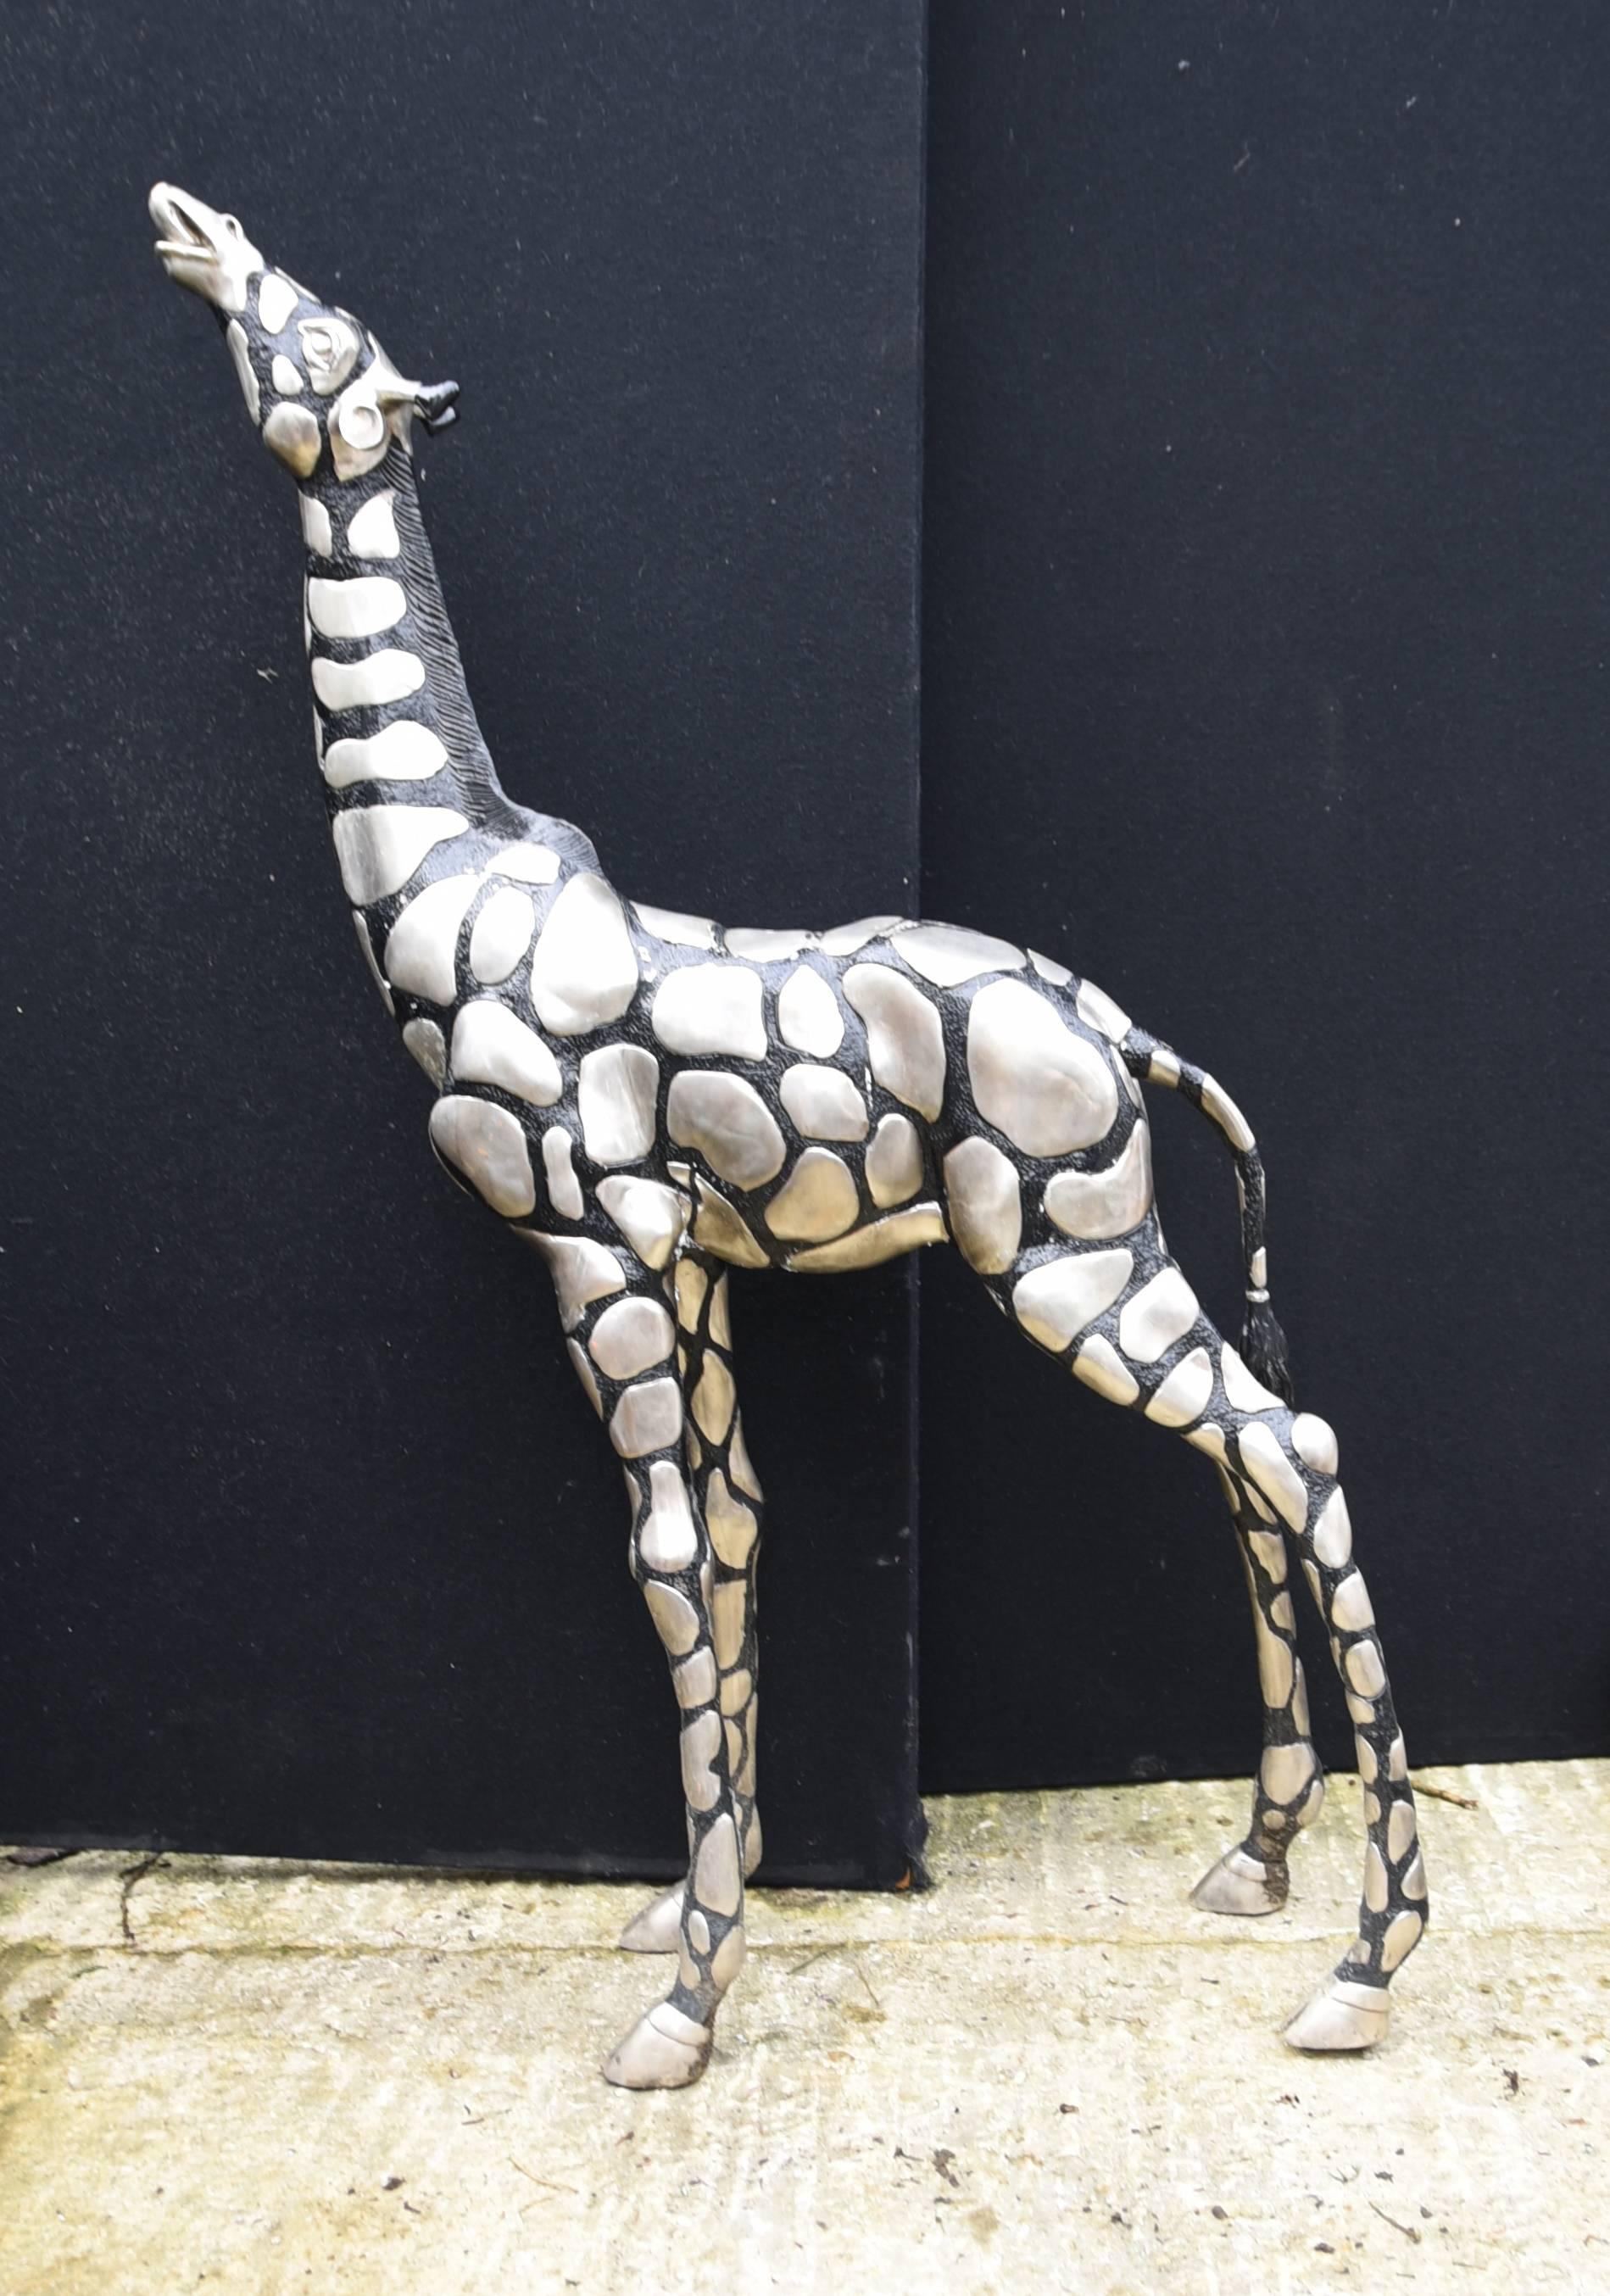 
Largest stands at over four feet tall - 132 cm
Love the silver bronze finish and how the distinctive coat to the animals has been rendered
Of course being bronze can live outside with no fear of rusting
Hence great for the garden
If you are